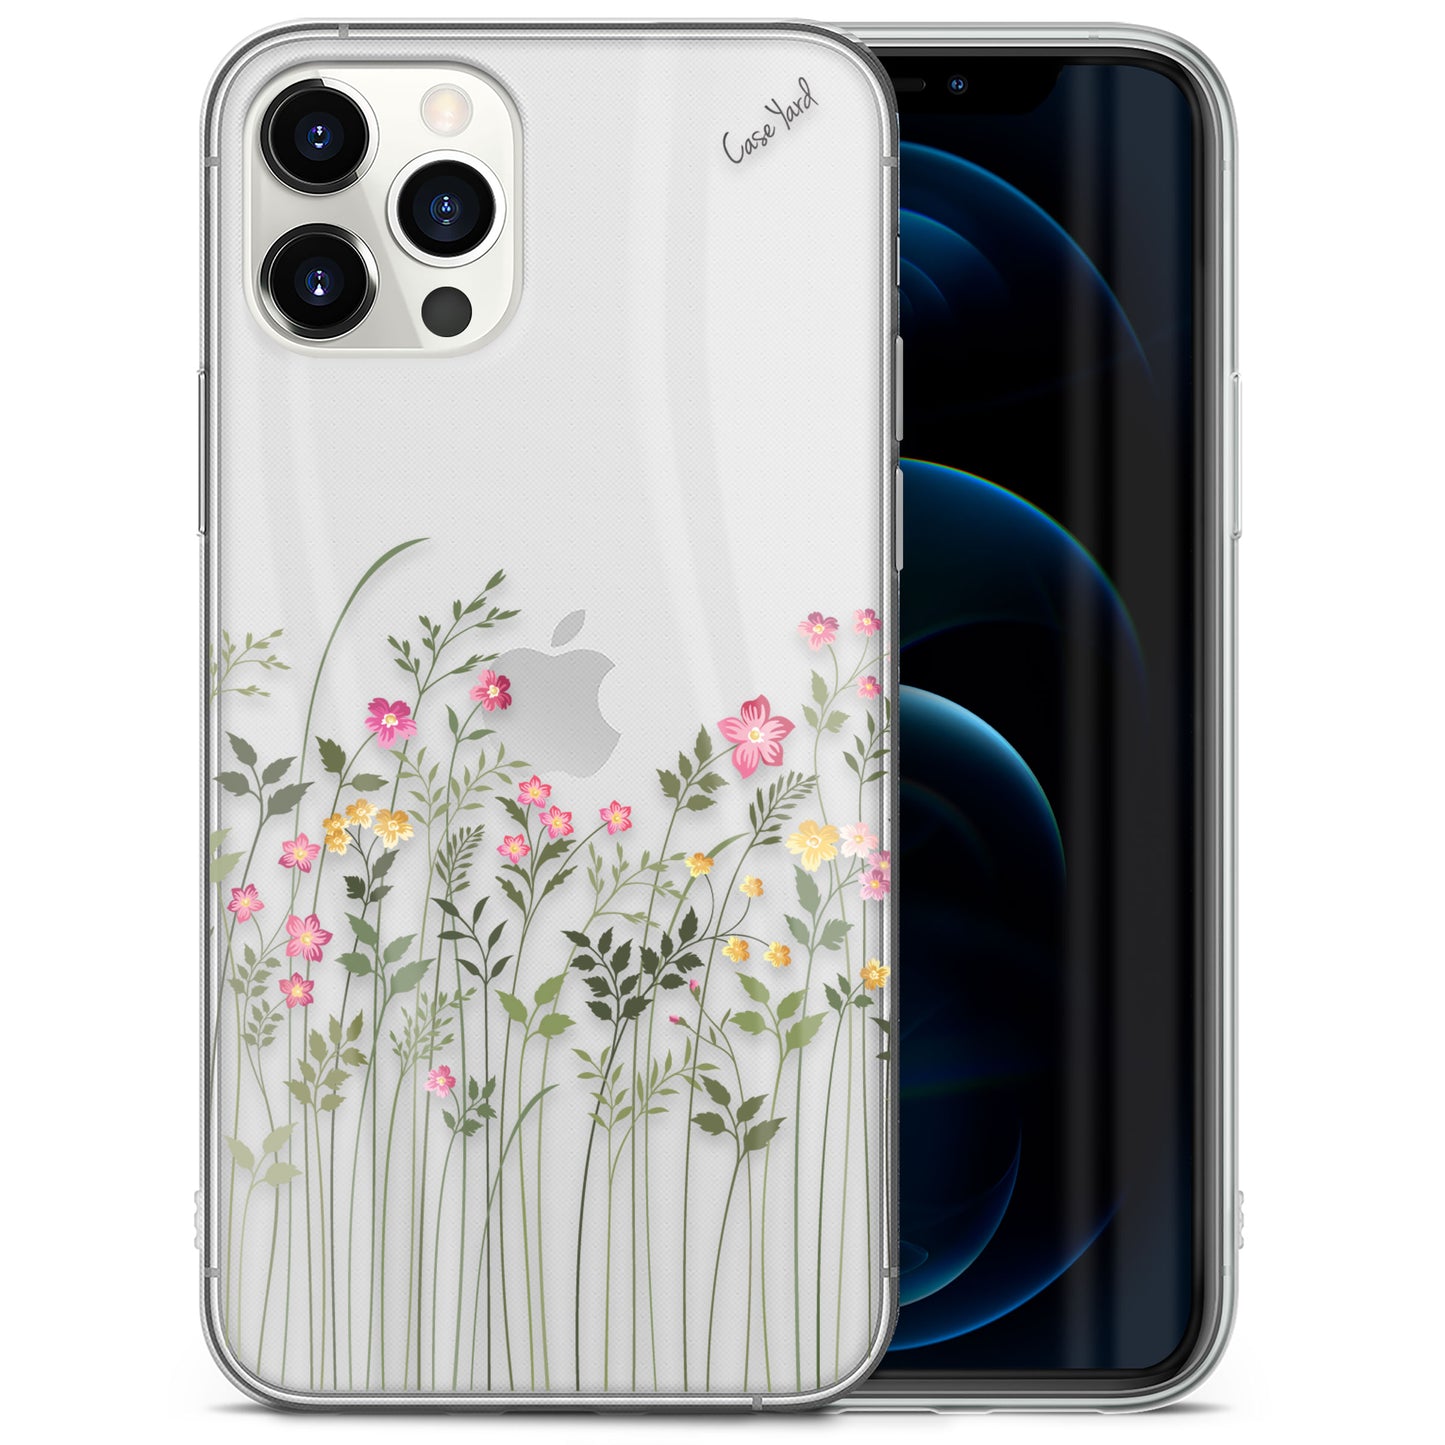 TPU Case Clear case with (Floral Flowers) Design for iPhone & Samsung Phones